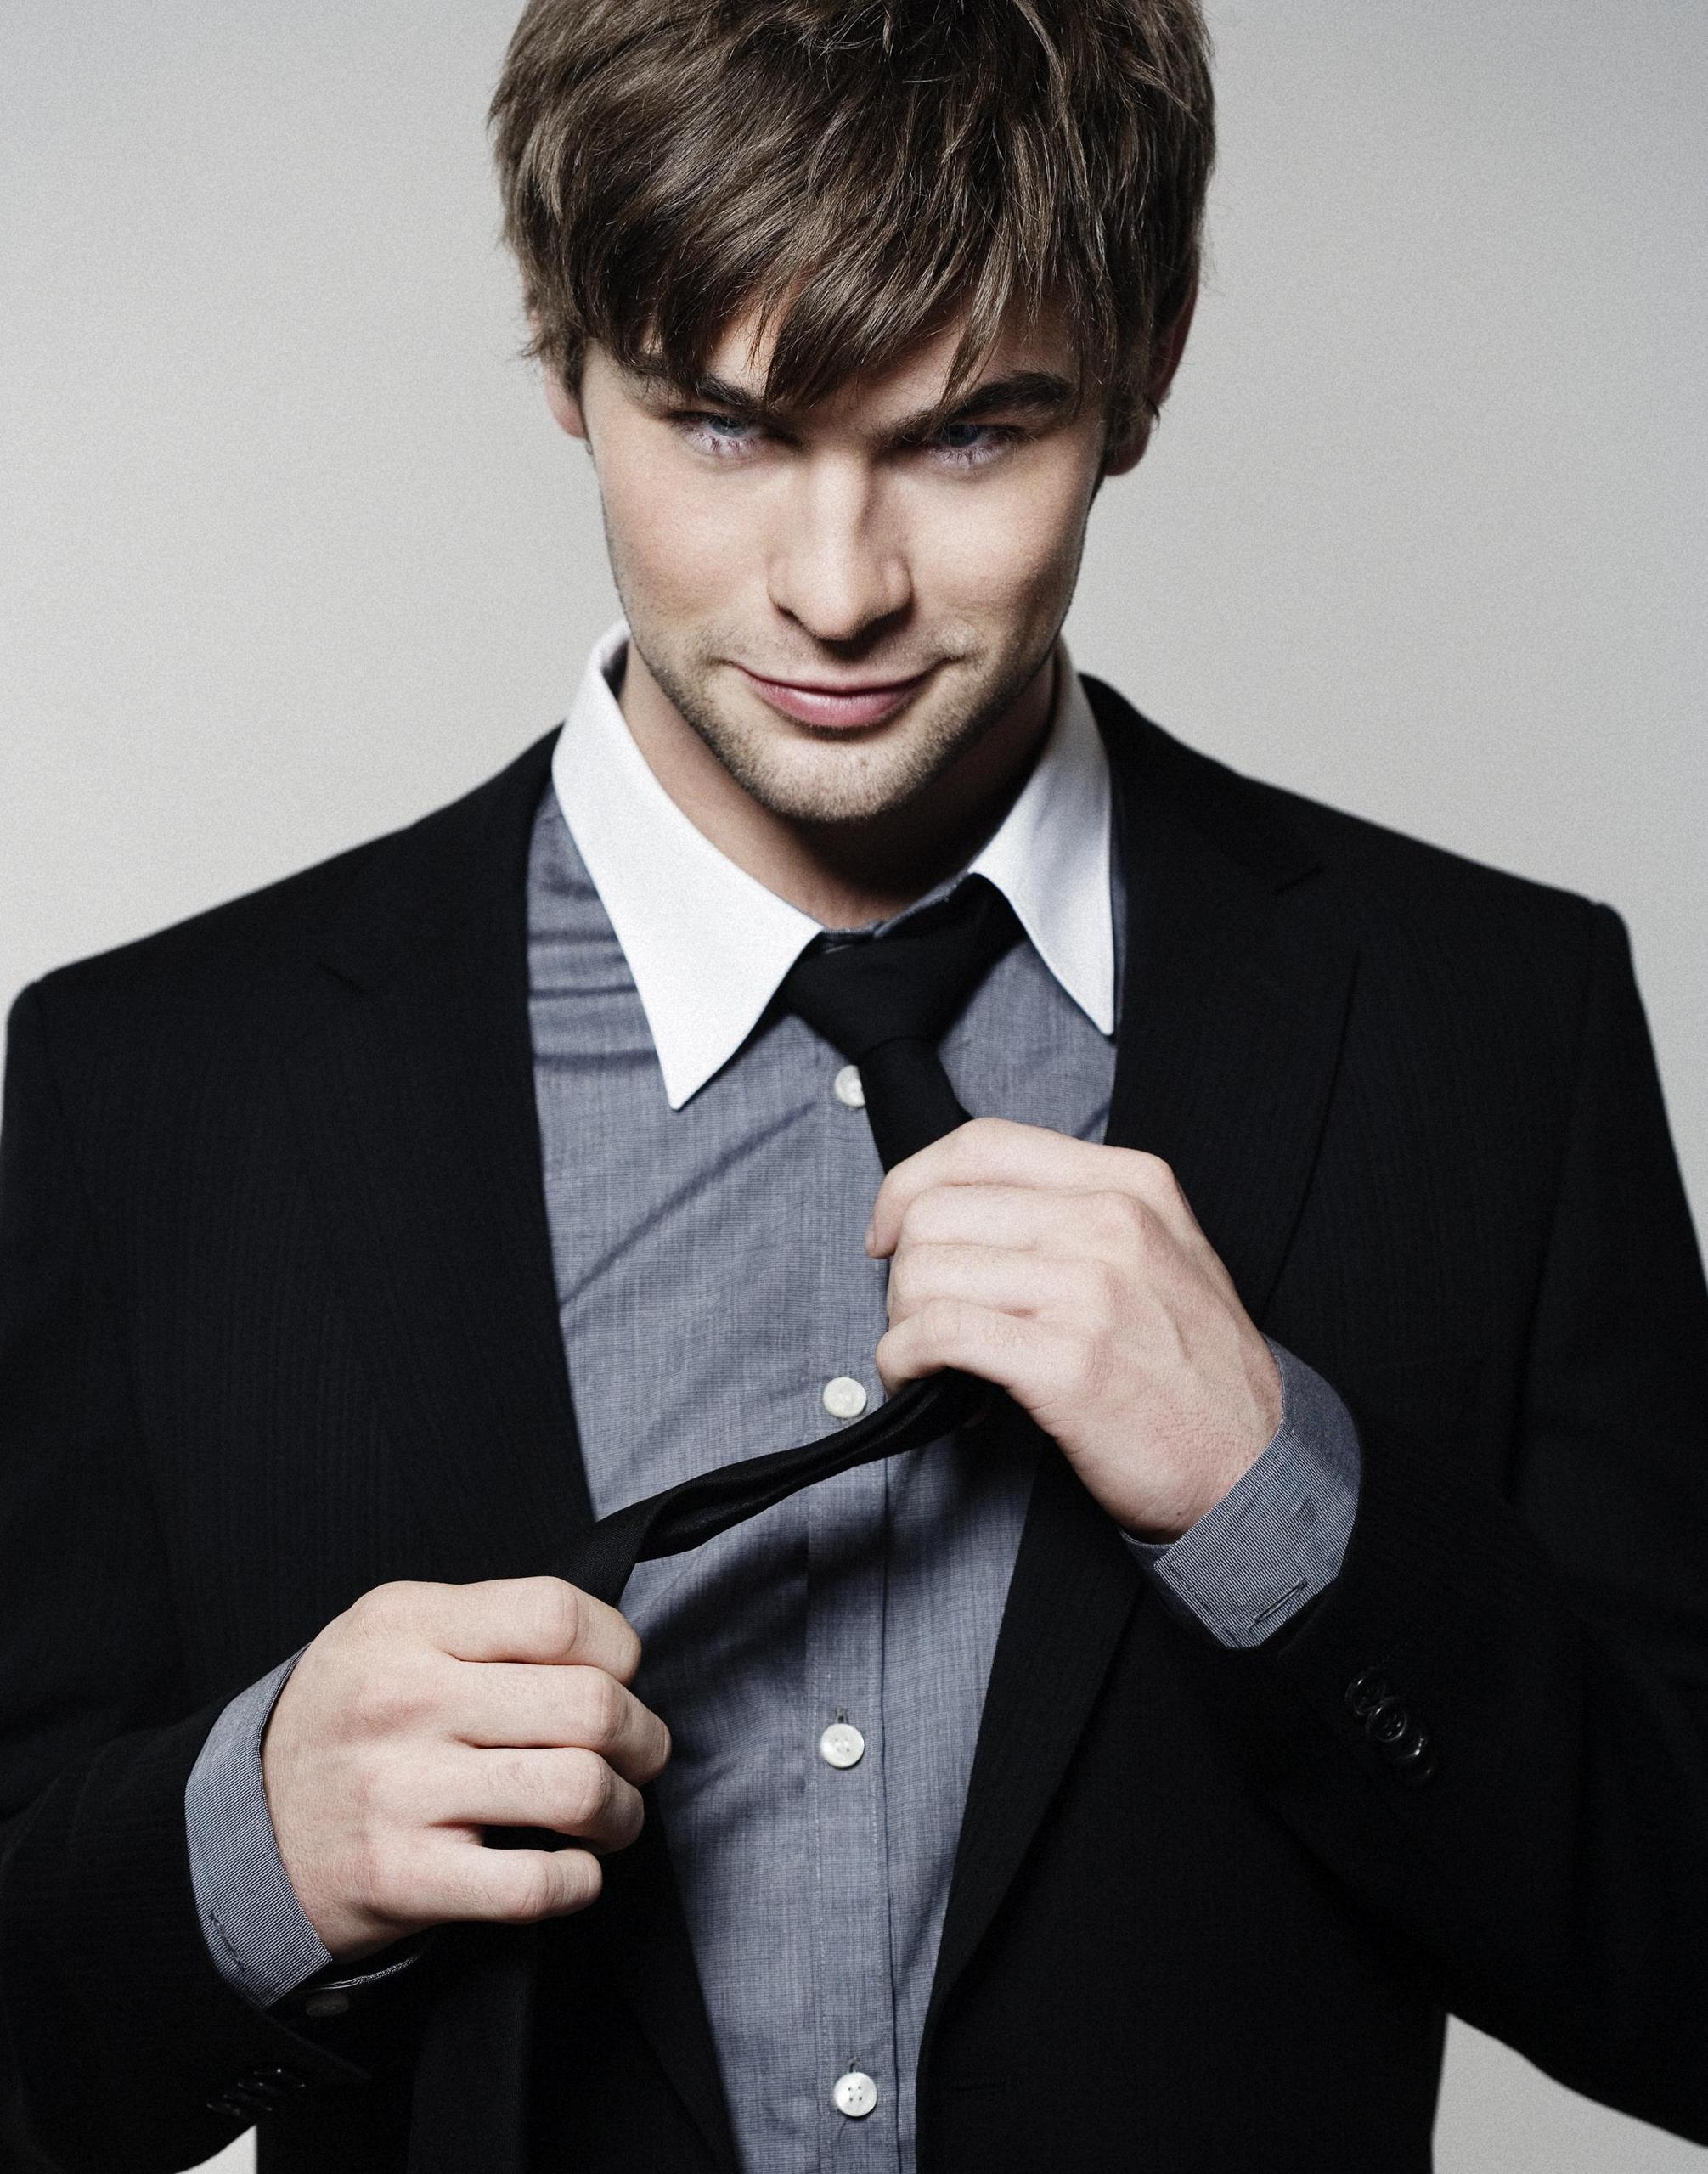 Chace Crawford - Photos